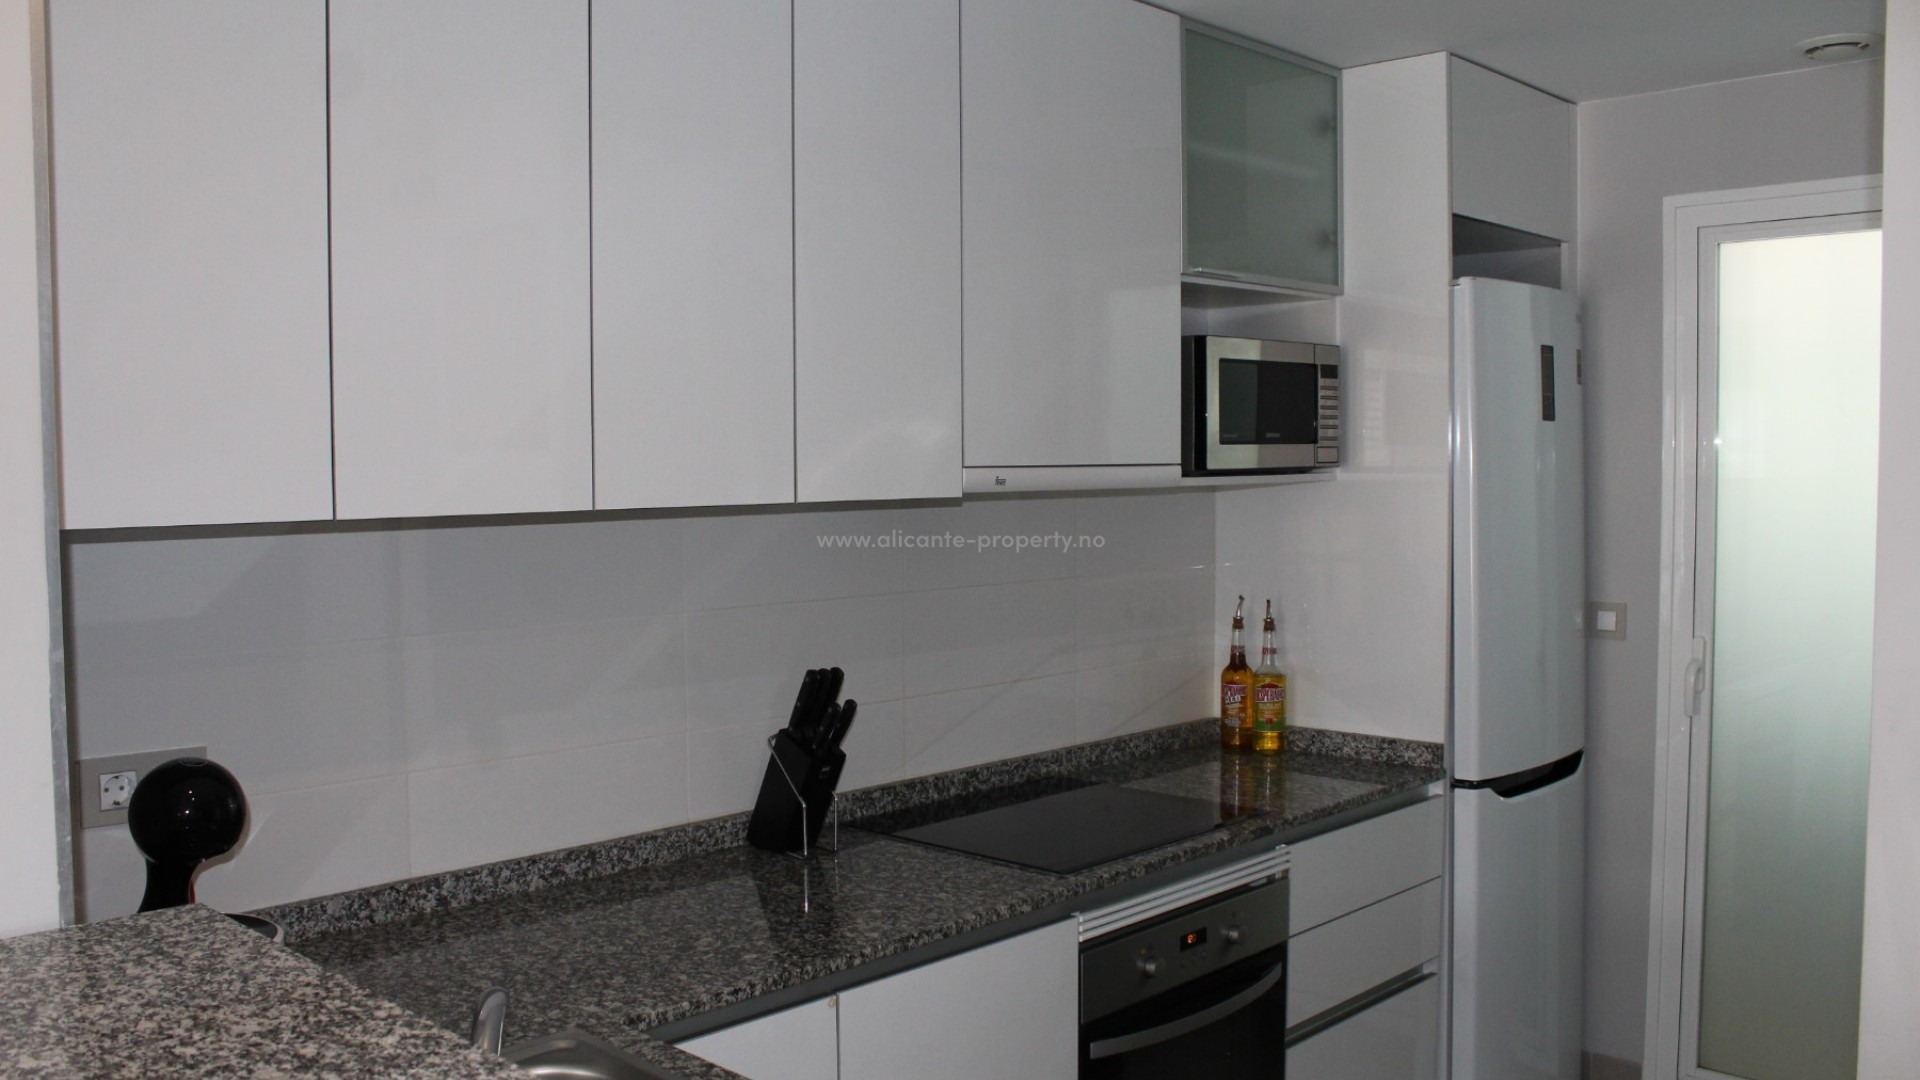 Apartment / flat in Cabo Roig